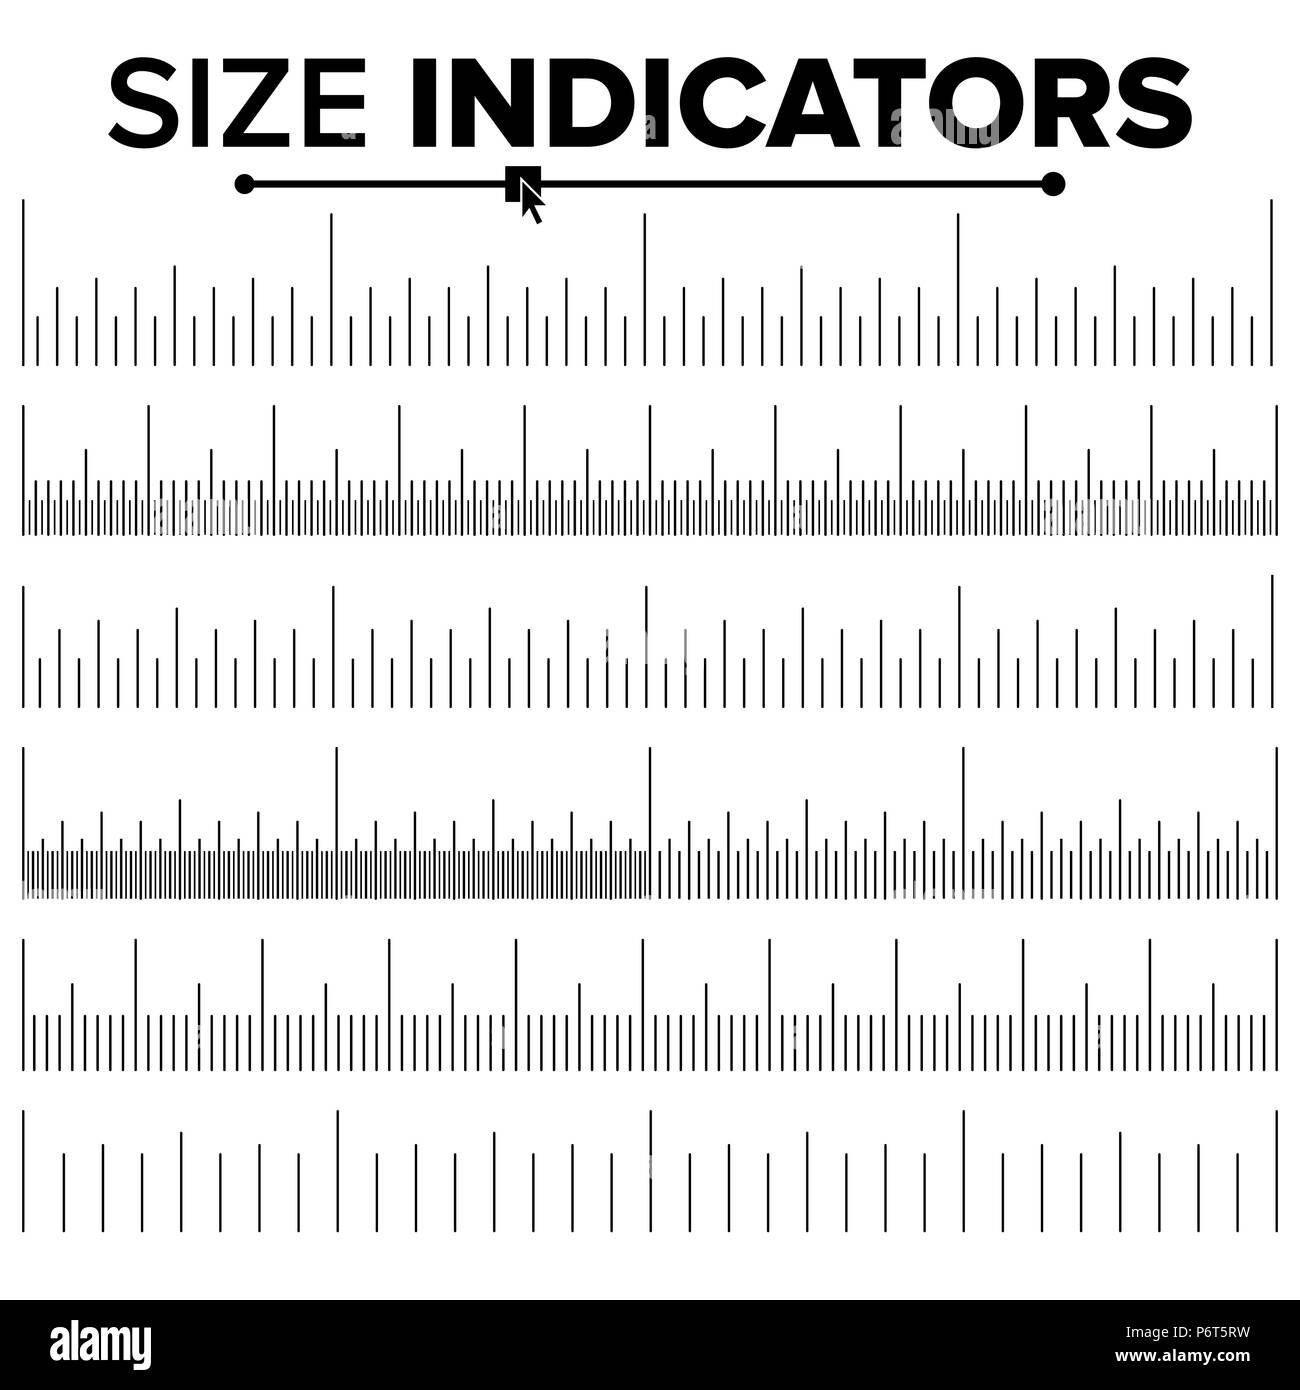 Inch and metric rulers set. Centimeters and inches measuring scale cm  metrics indicator. Precision measurement centimeter icon tools of measure  size indication ruler tools. Stock Vector